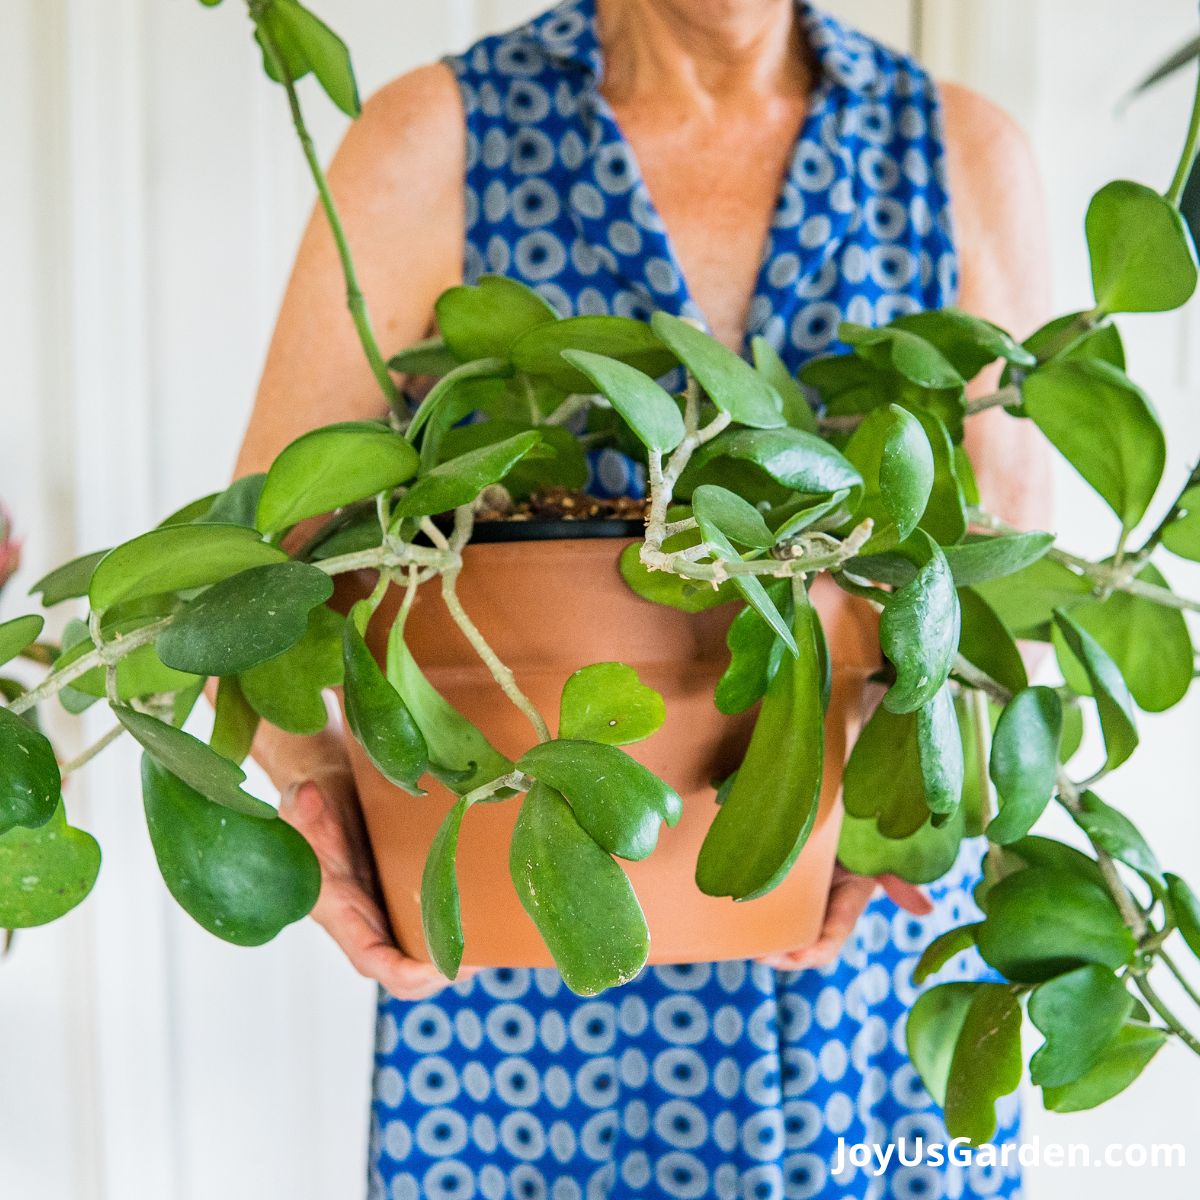 nell foster in blue dress holding a newly repotted hoya kerrii in a grow pot in a clay pot 